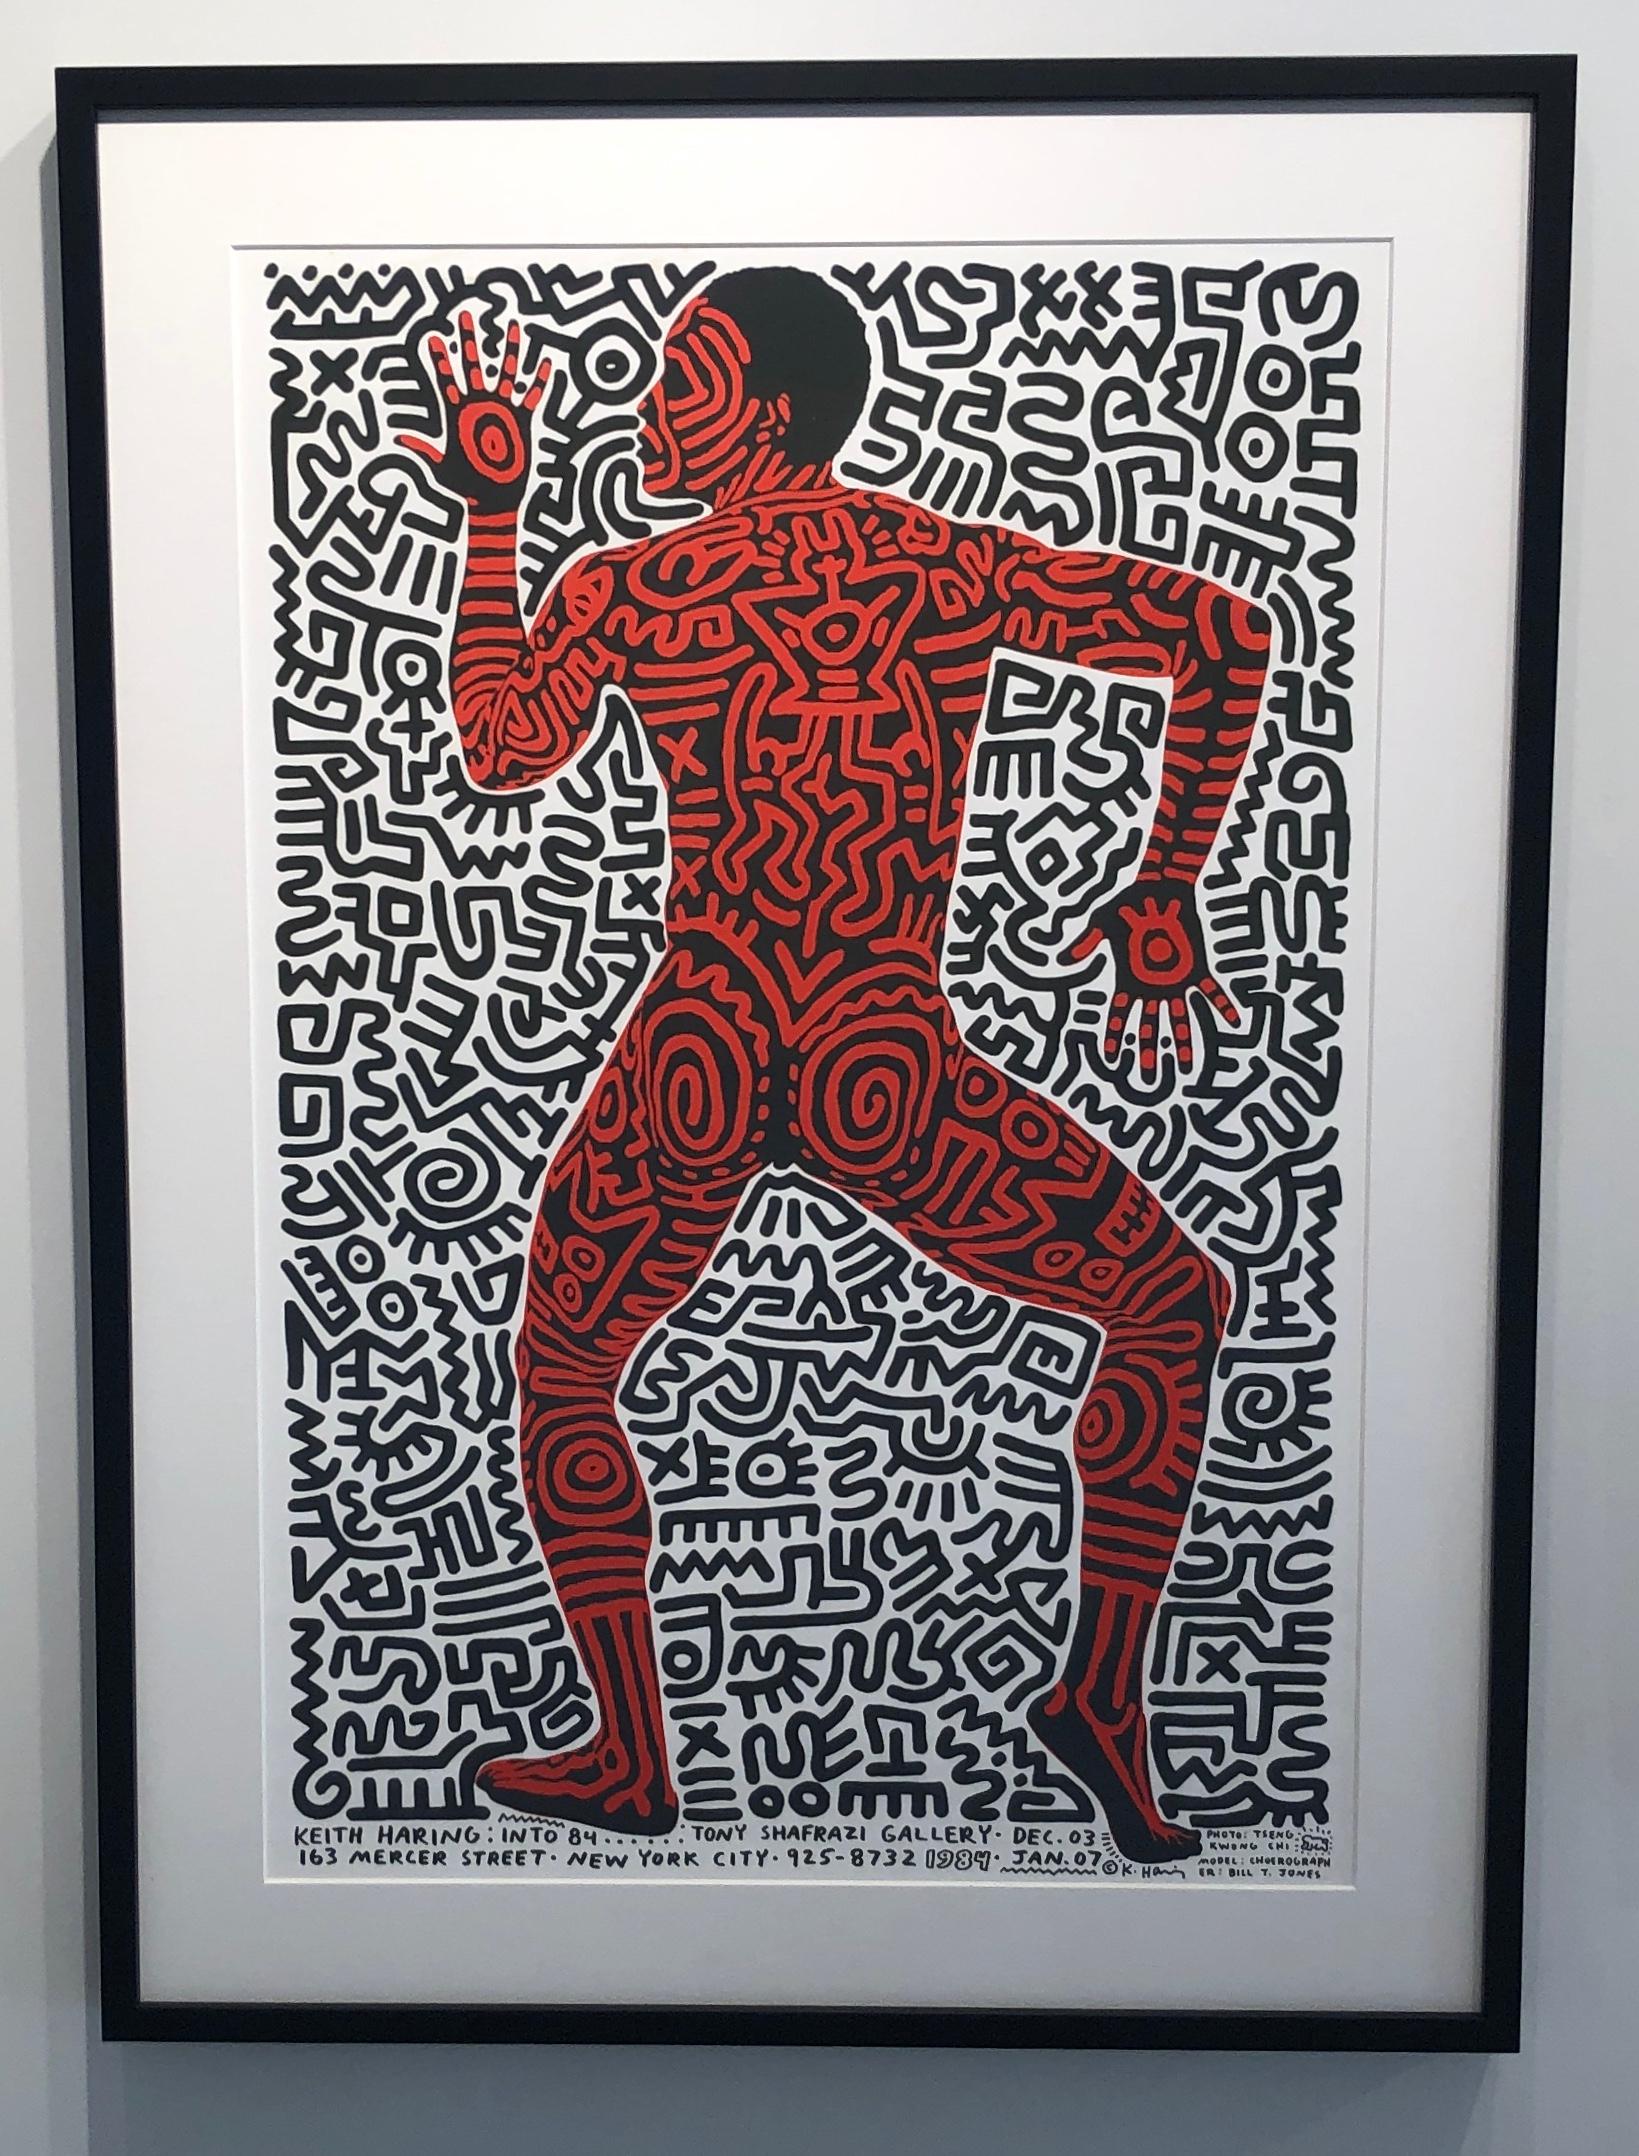 Into 84 - Pop Art Print by (after) Keith Haring